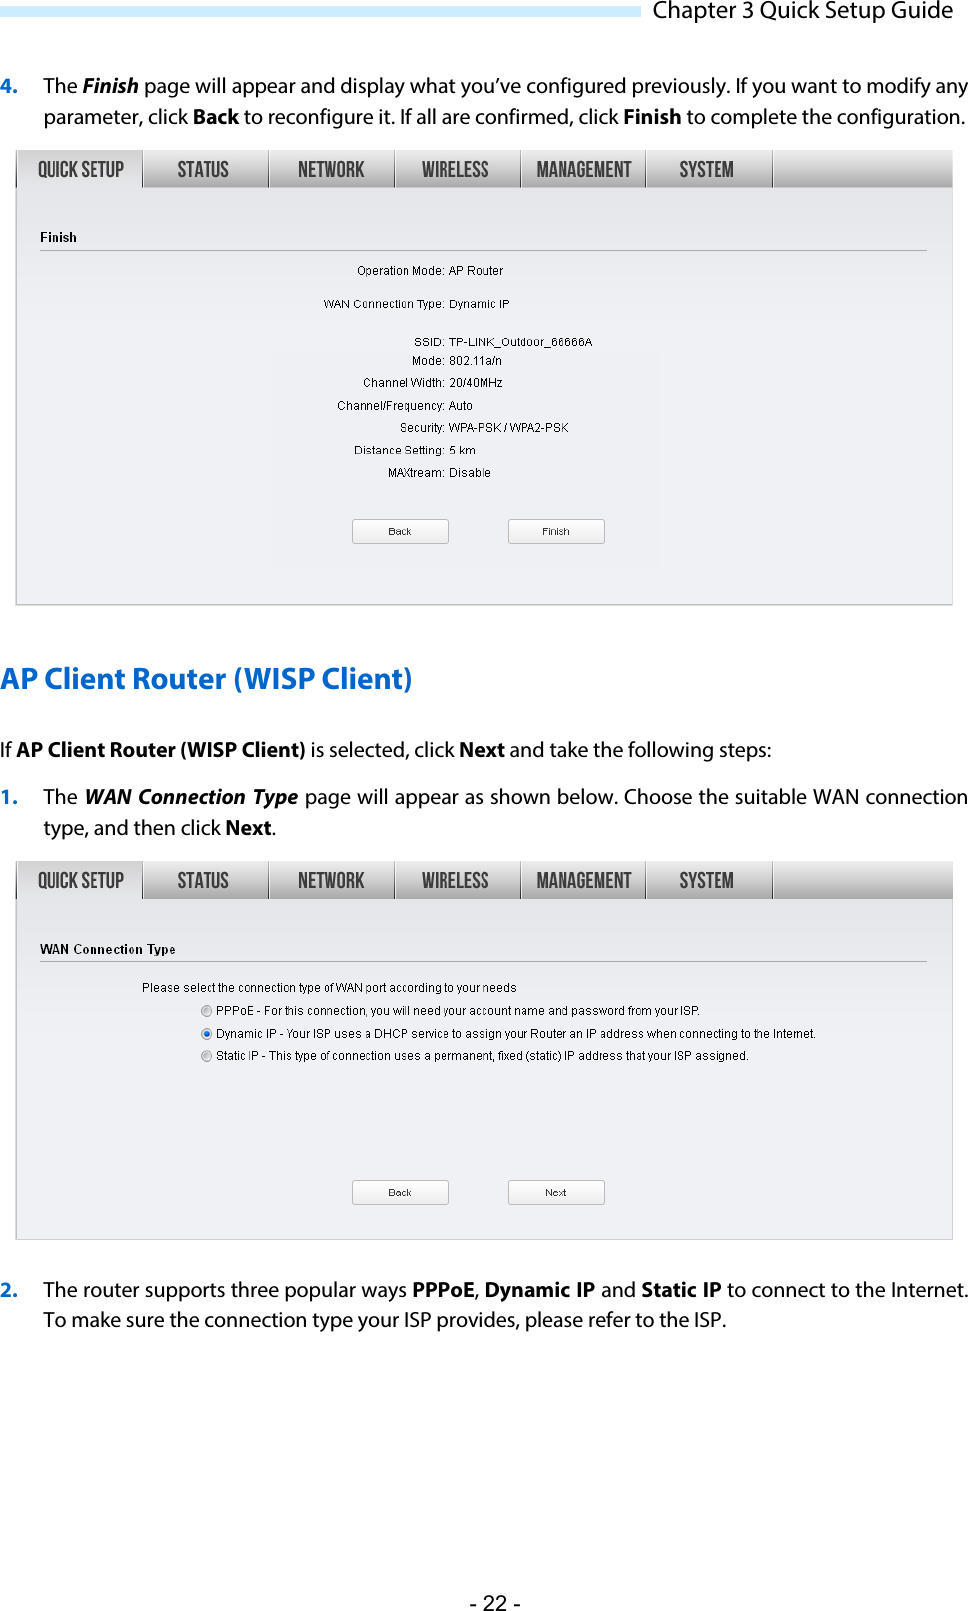  Chapter 3 Quick Setup Guide 4. The Finish page will appear and display what you’ve configured previously. If you want to modify any parameter, click Back to reconfigure it. If all are confirmed, click Finish to complete the configuration.  AP Client Router (WISP Client) If AP Client Router (WISP Client) is selected, click Next and take the following steps: 1. The WAN  Connection Type page will appear as shown below. Choose the suitable WAN connection type, and then click Next.  2. The router supports three popular ways PPPoE, Dynamic IP and Static IP to connect to the Internet. To make sure the connection type your ISP provides, please refer to the ISP. - 22 - 